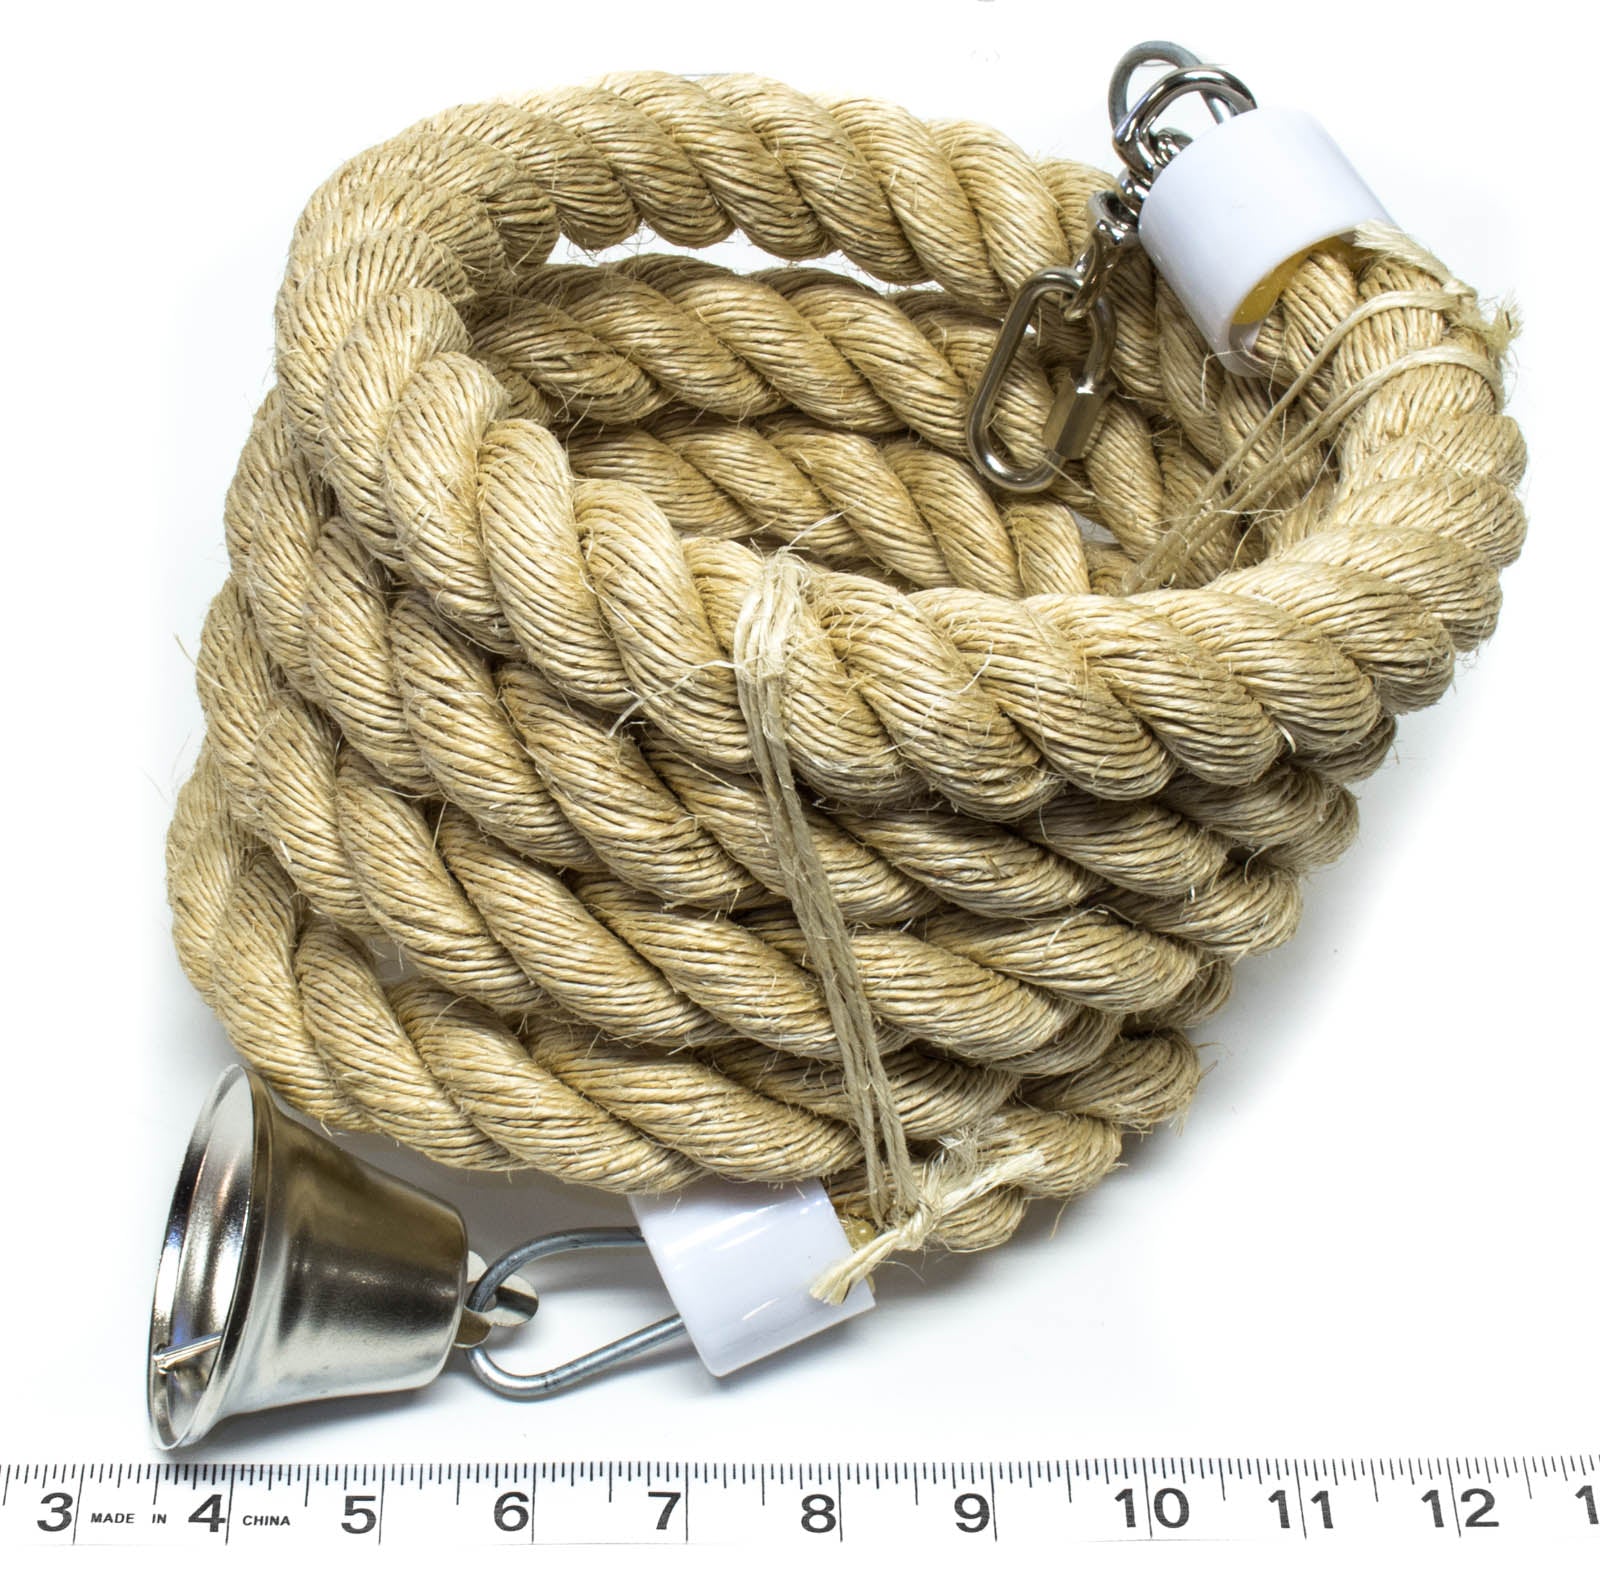 Small Comfy Rope Perch by JW Pet